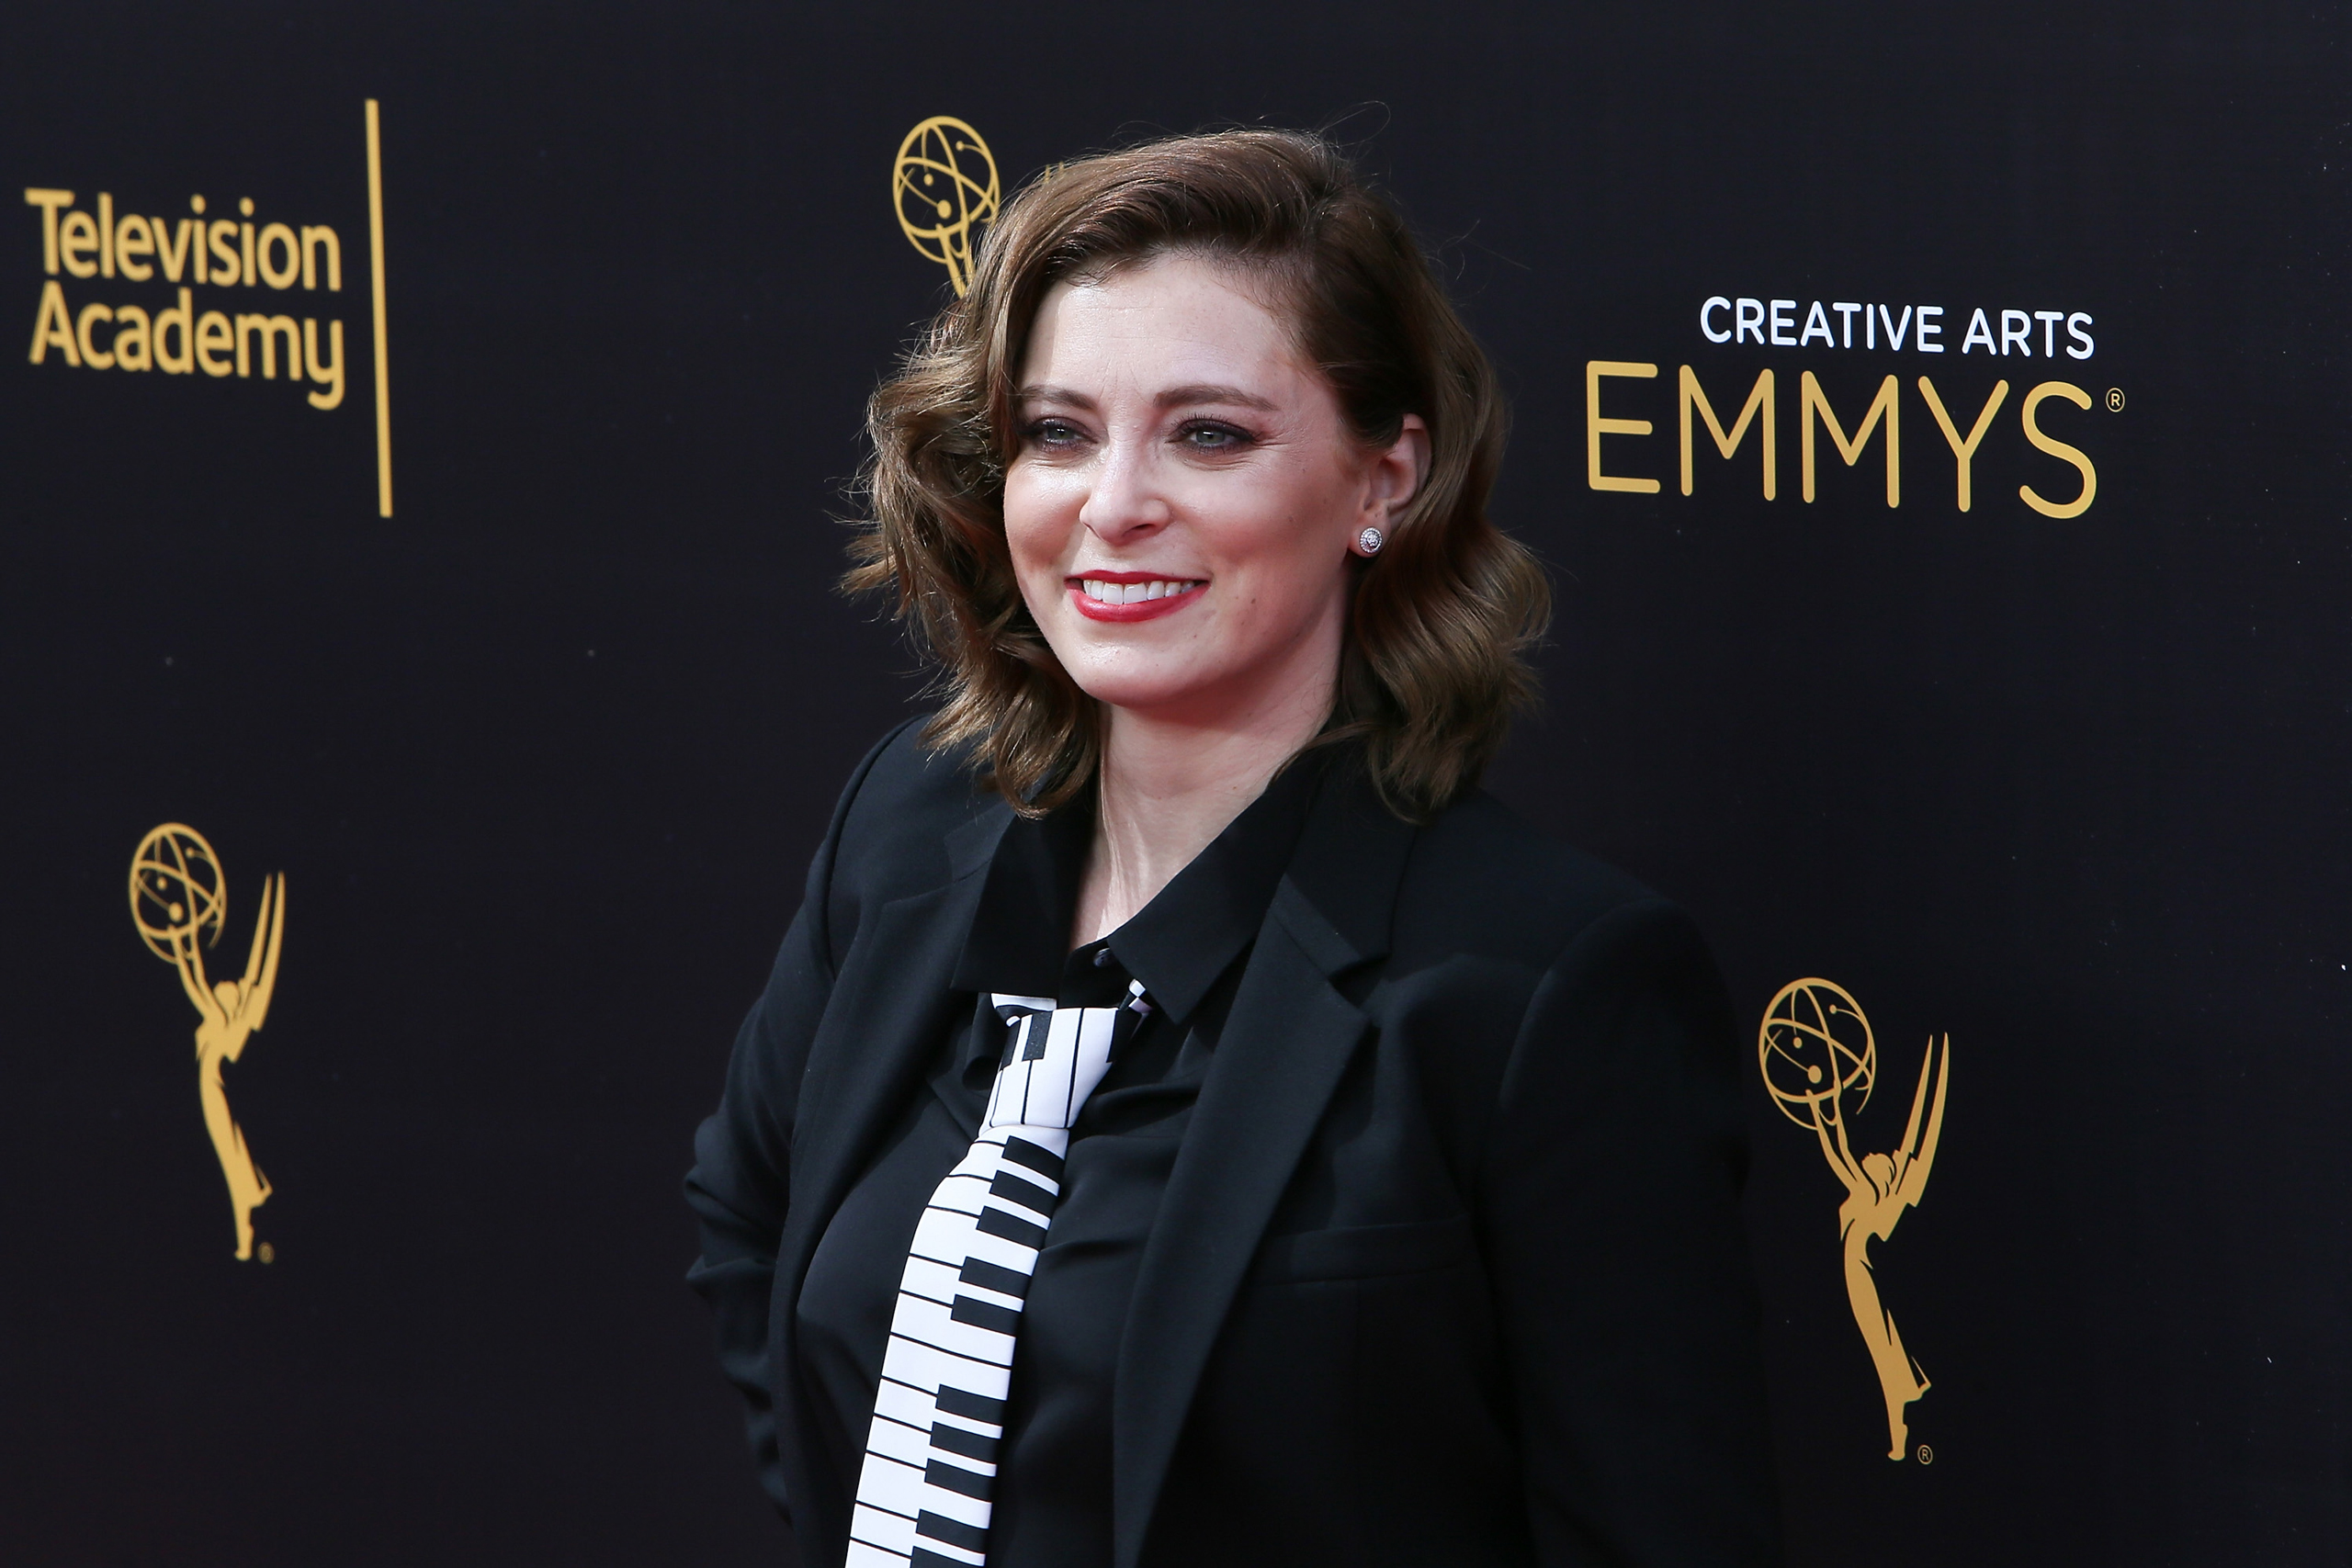 Rachel Bloom attends the 2016 Creative Arts Emmy Awards Day 1 at the Microsoft Theater in Los Angeles on Sept. 10, 2016. (David Livingston—Getty Images)